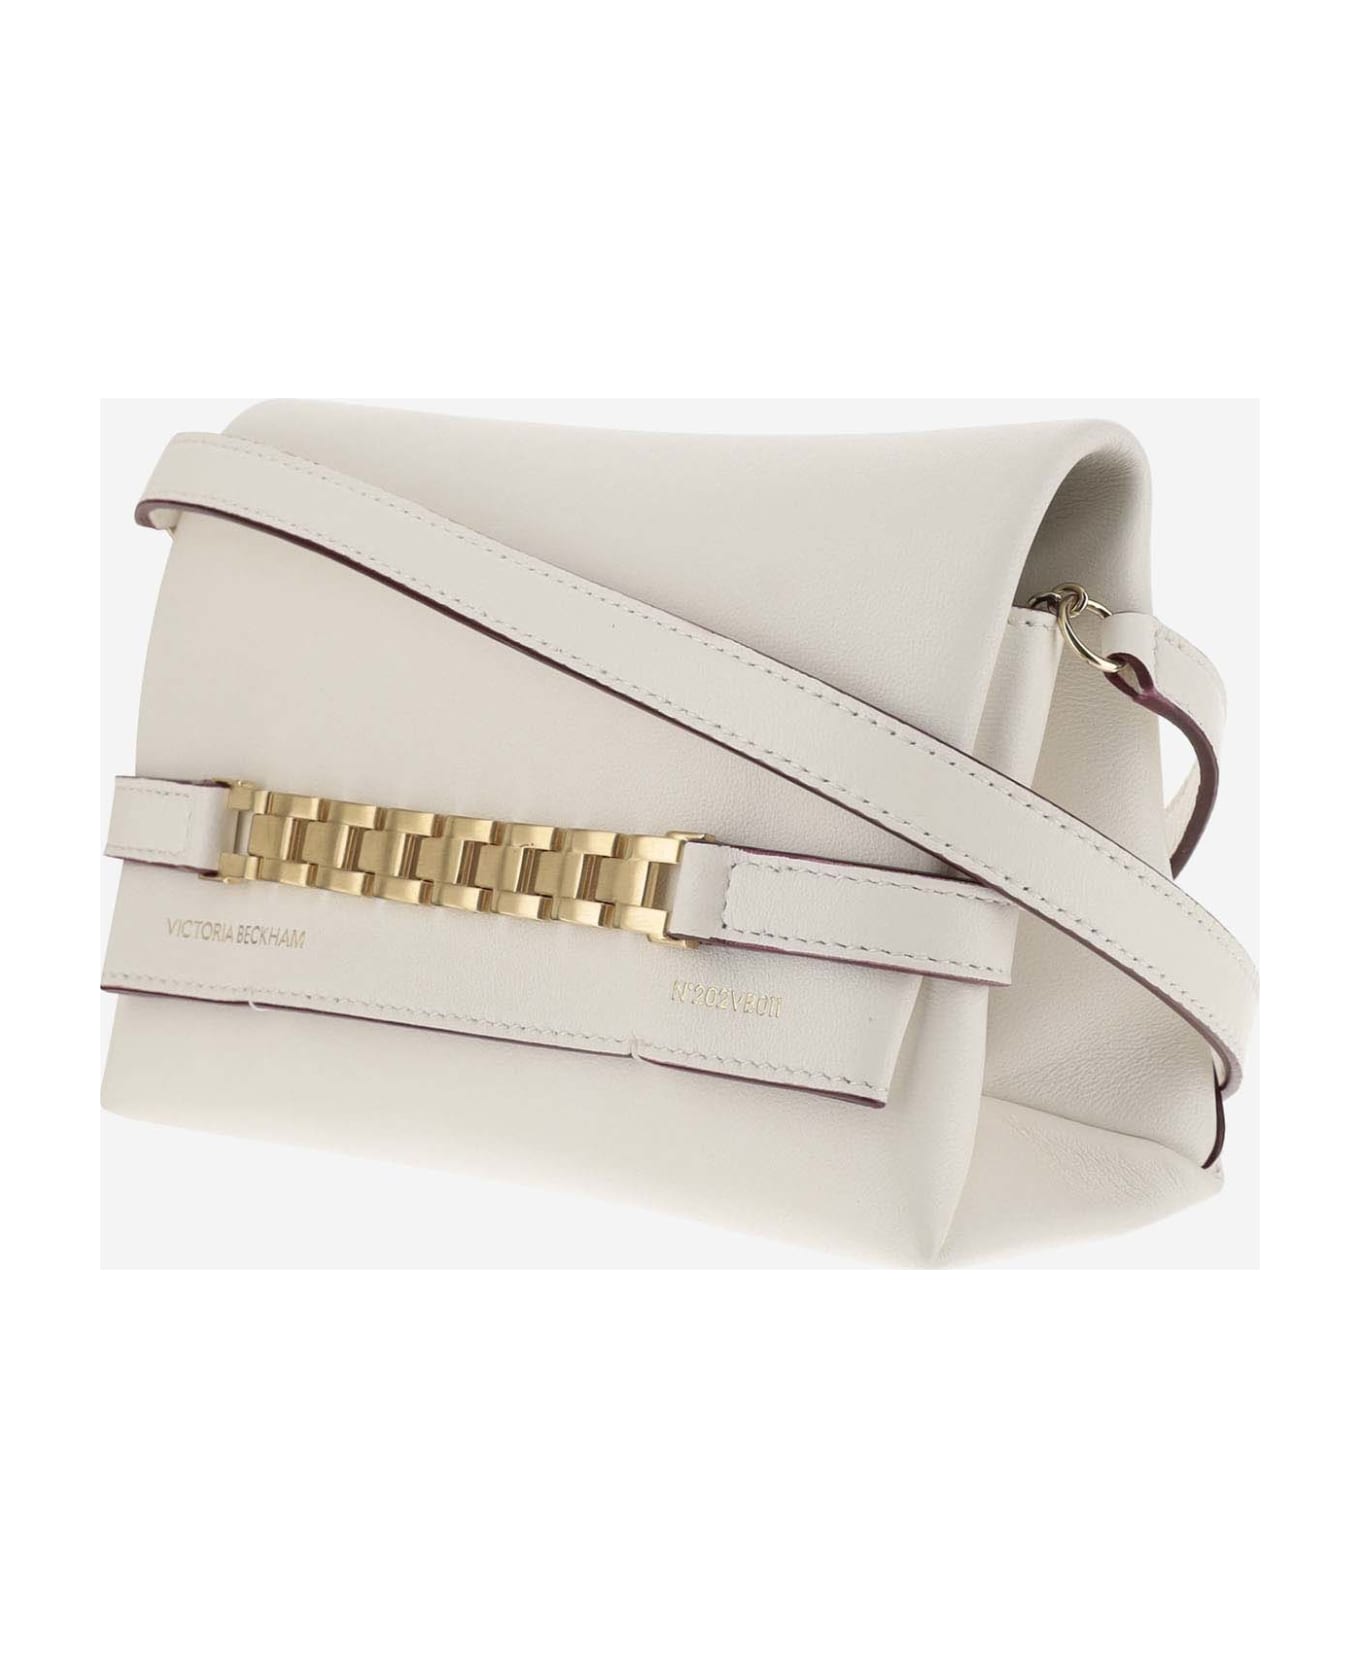 Victoria Beckham Shoulder Bag With Chain - Ivory ショルダーバッグ